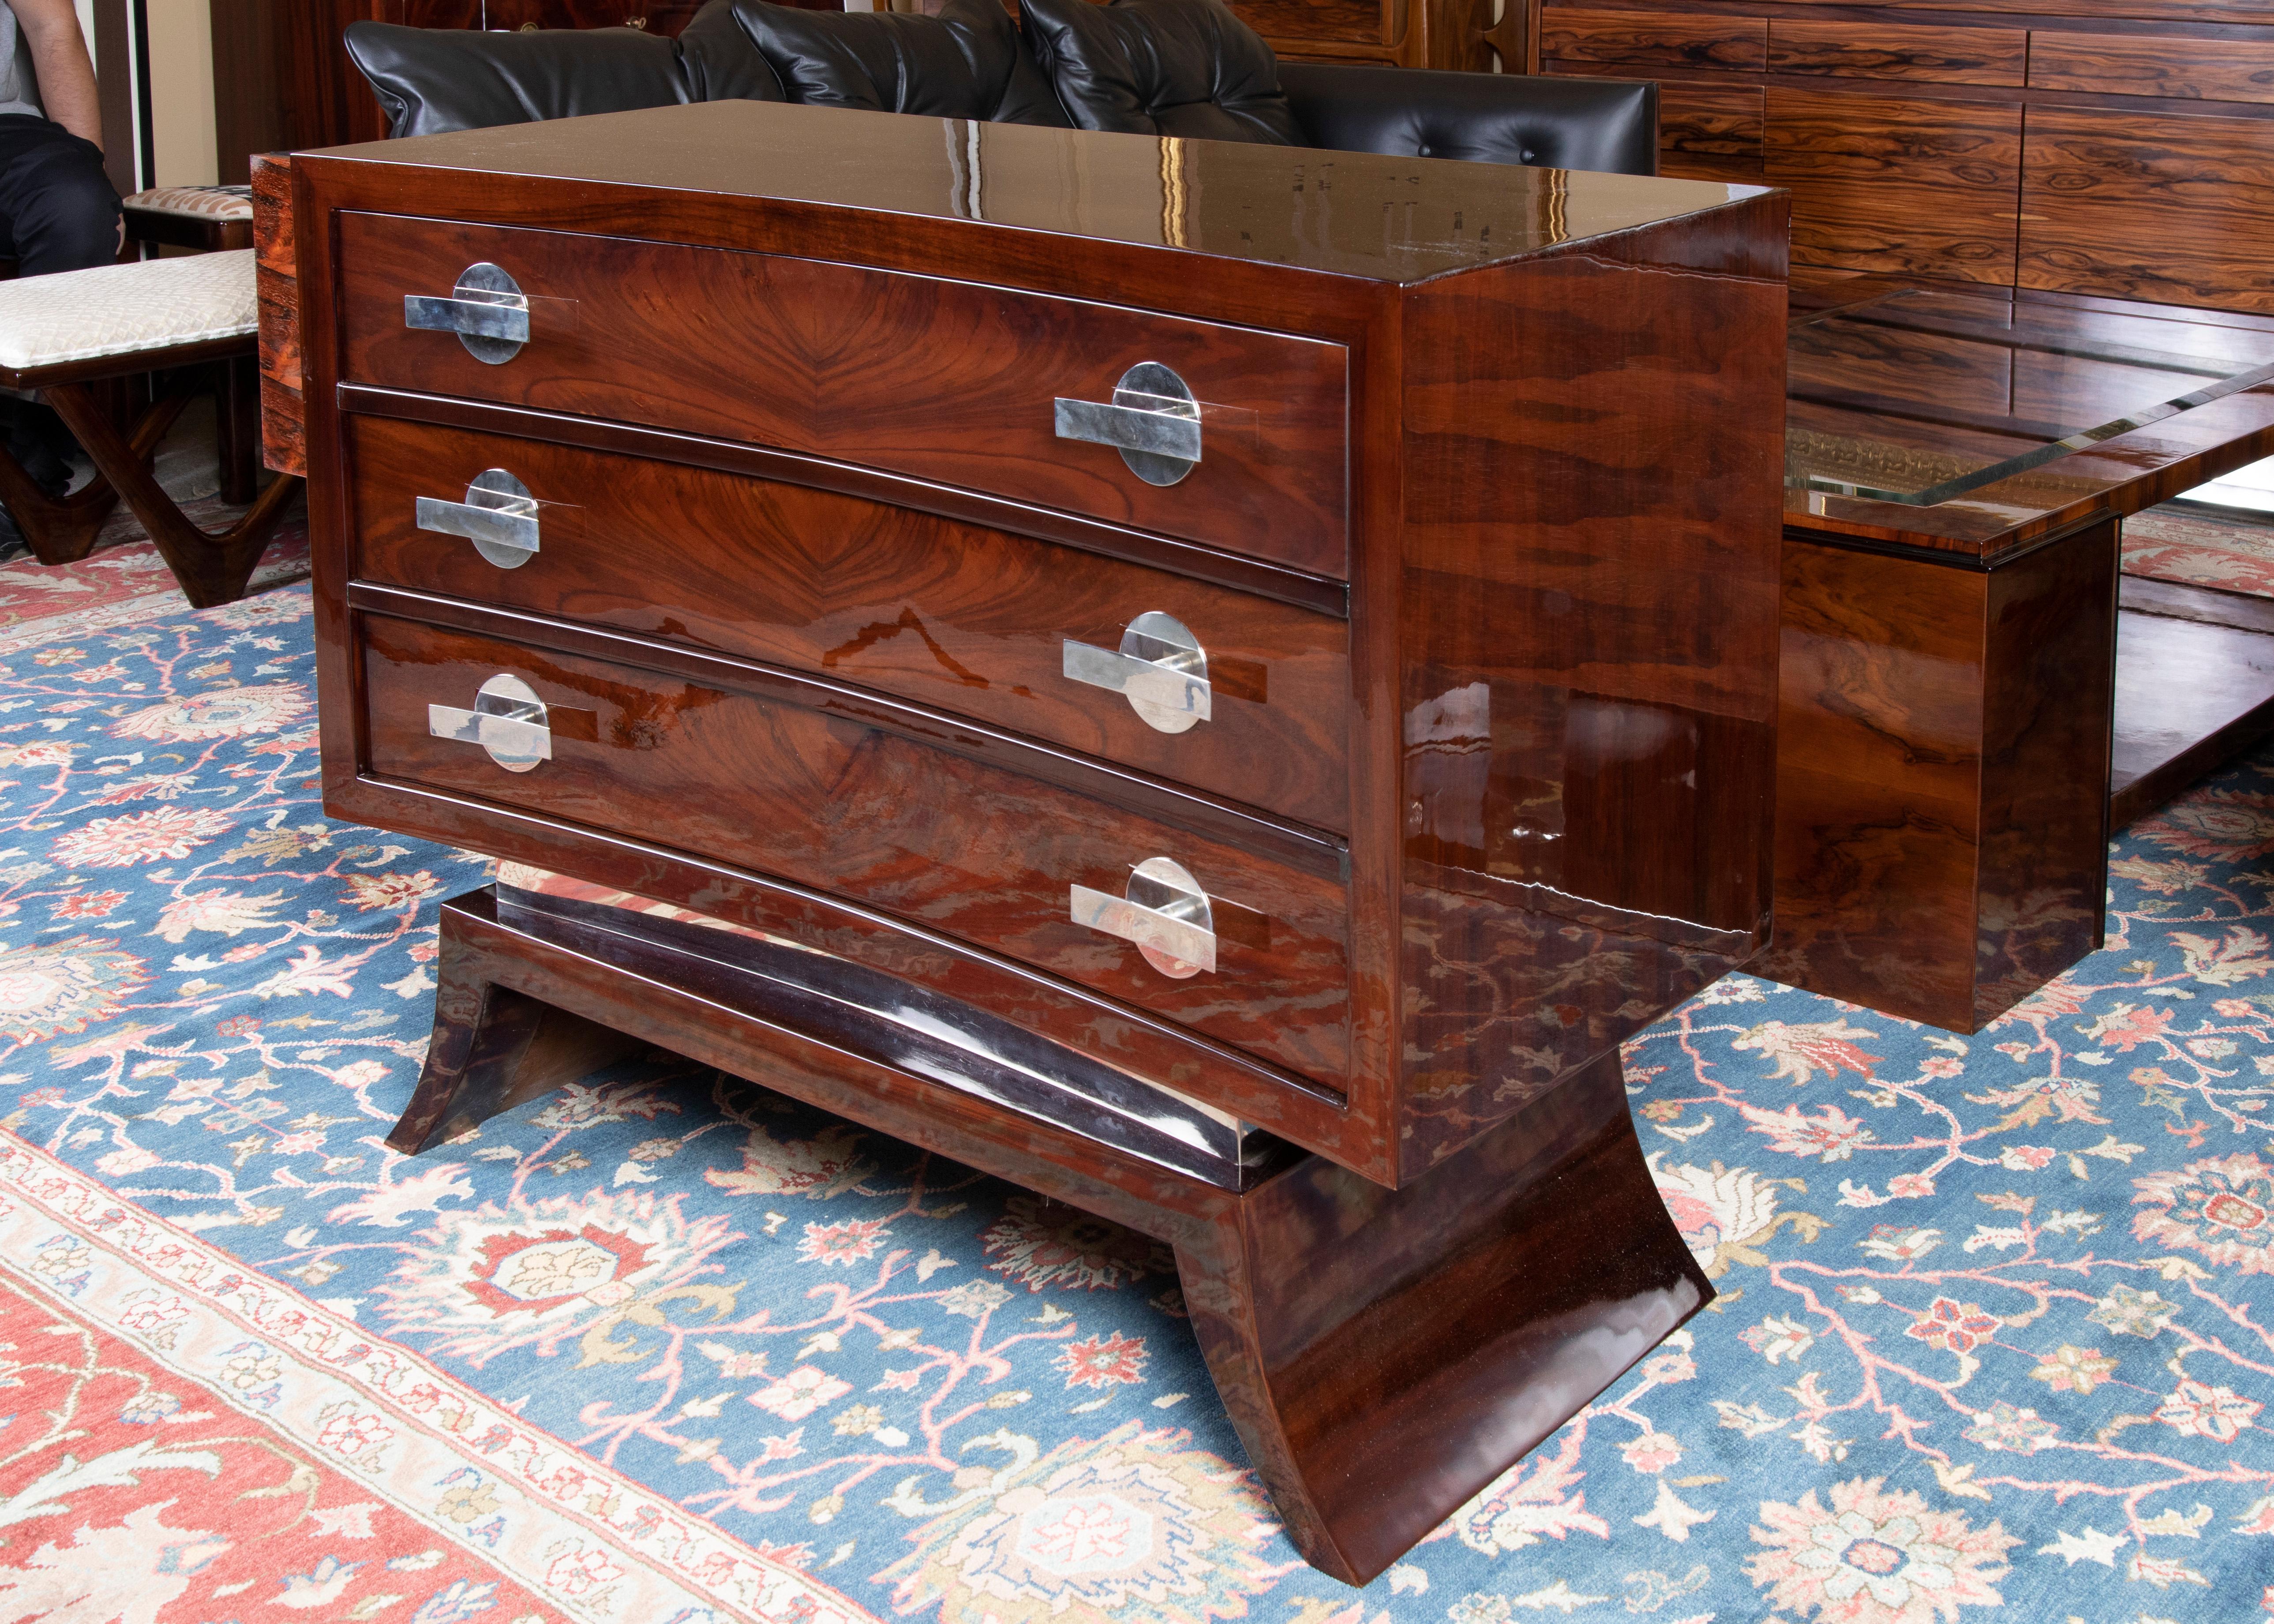 Pair of Art Deco chests of drawers from France
Chest of drawers is made out of walnut wood, has 3 spacious drawers with 2 handles each. Resting on trapezoid base. Front of the chest of drawers was curved. 

Condition is perfect.